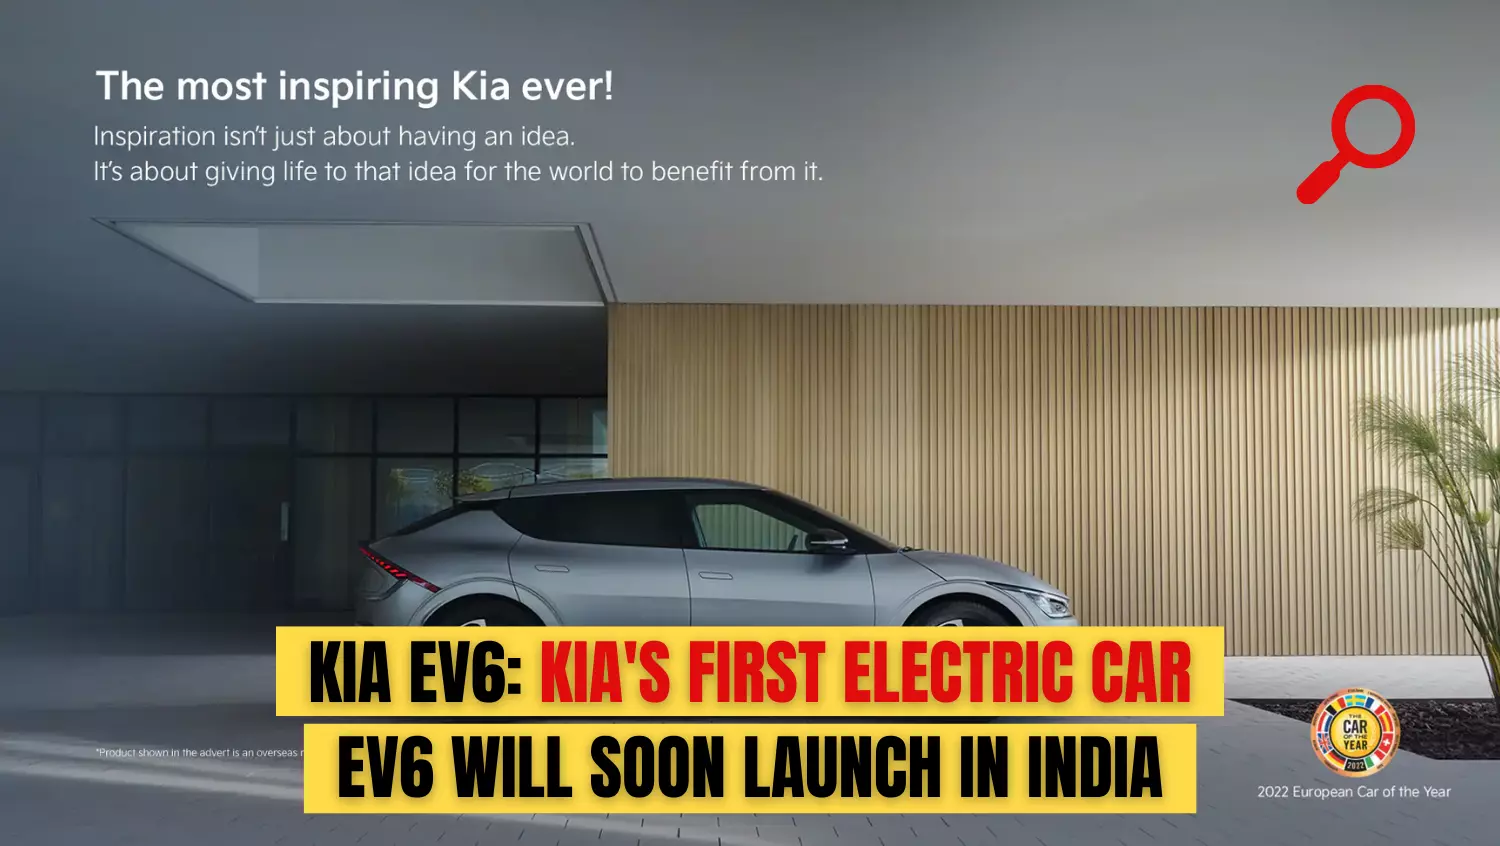 Kia EV6: Kia's first electric car EV6 will soon launch in India. Check features and specifications